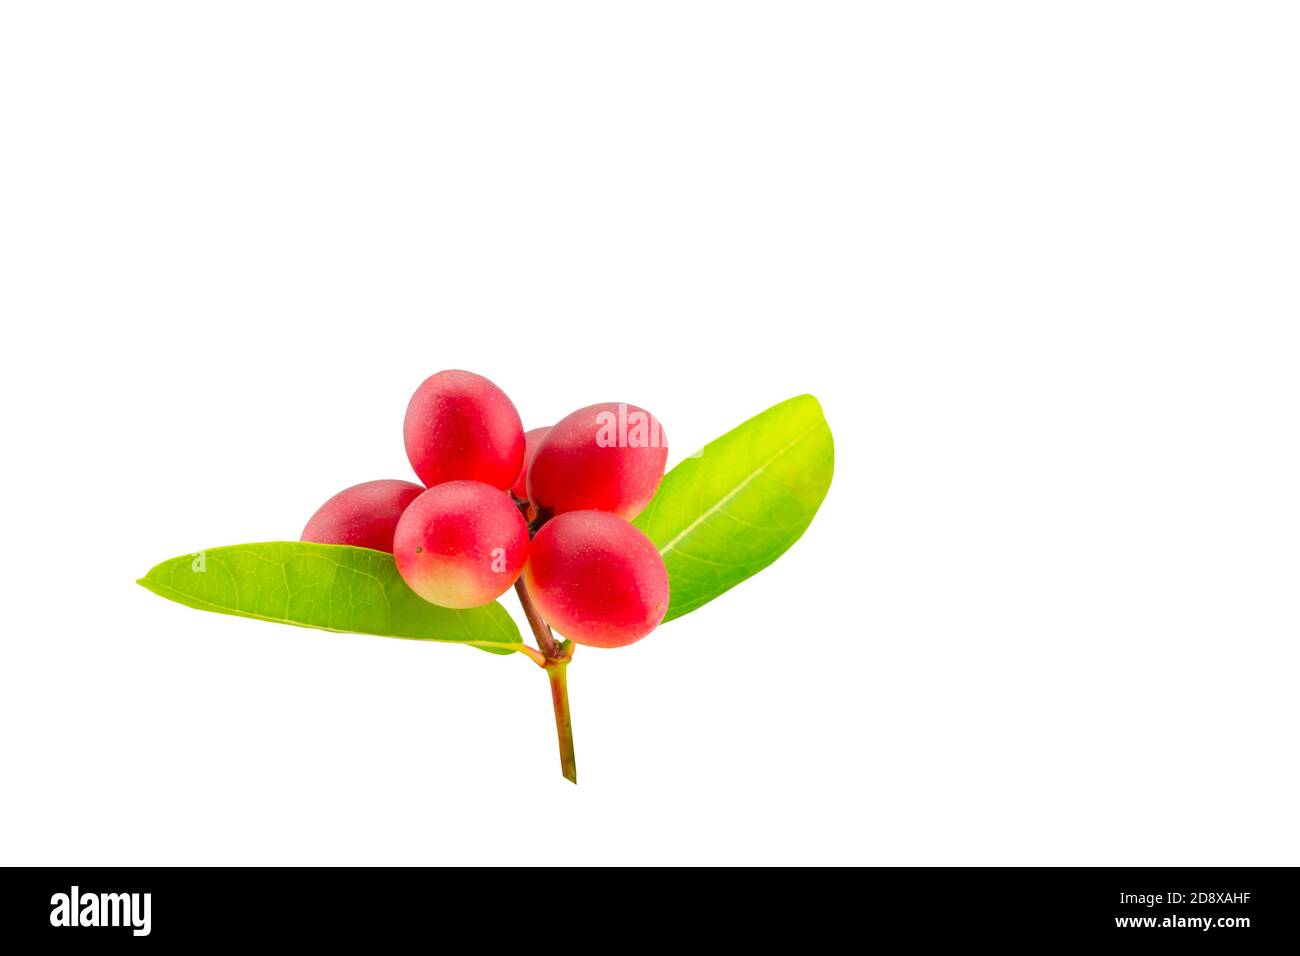 Bengal Currants are fruits Thai herbs with green leaf isolated on white background.Save with clipping path. Stock Photo